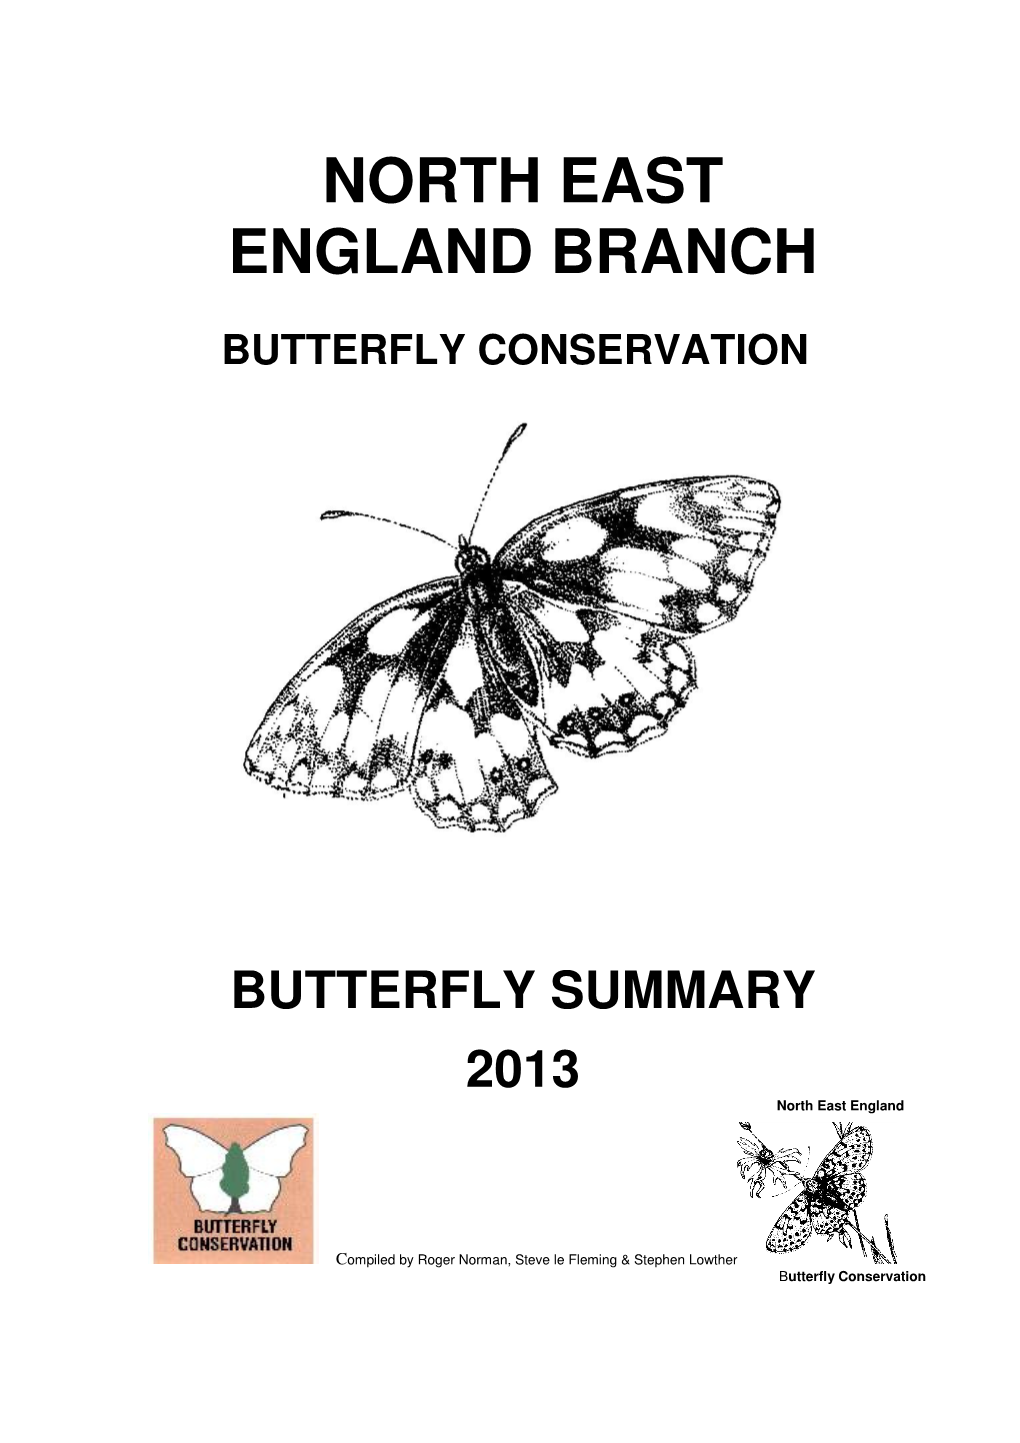 2013 Butterfly Summary Report